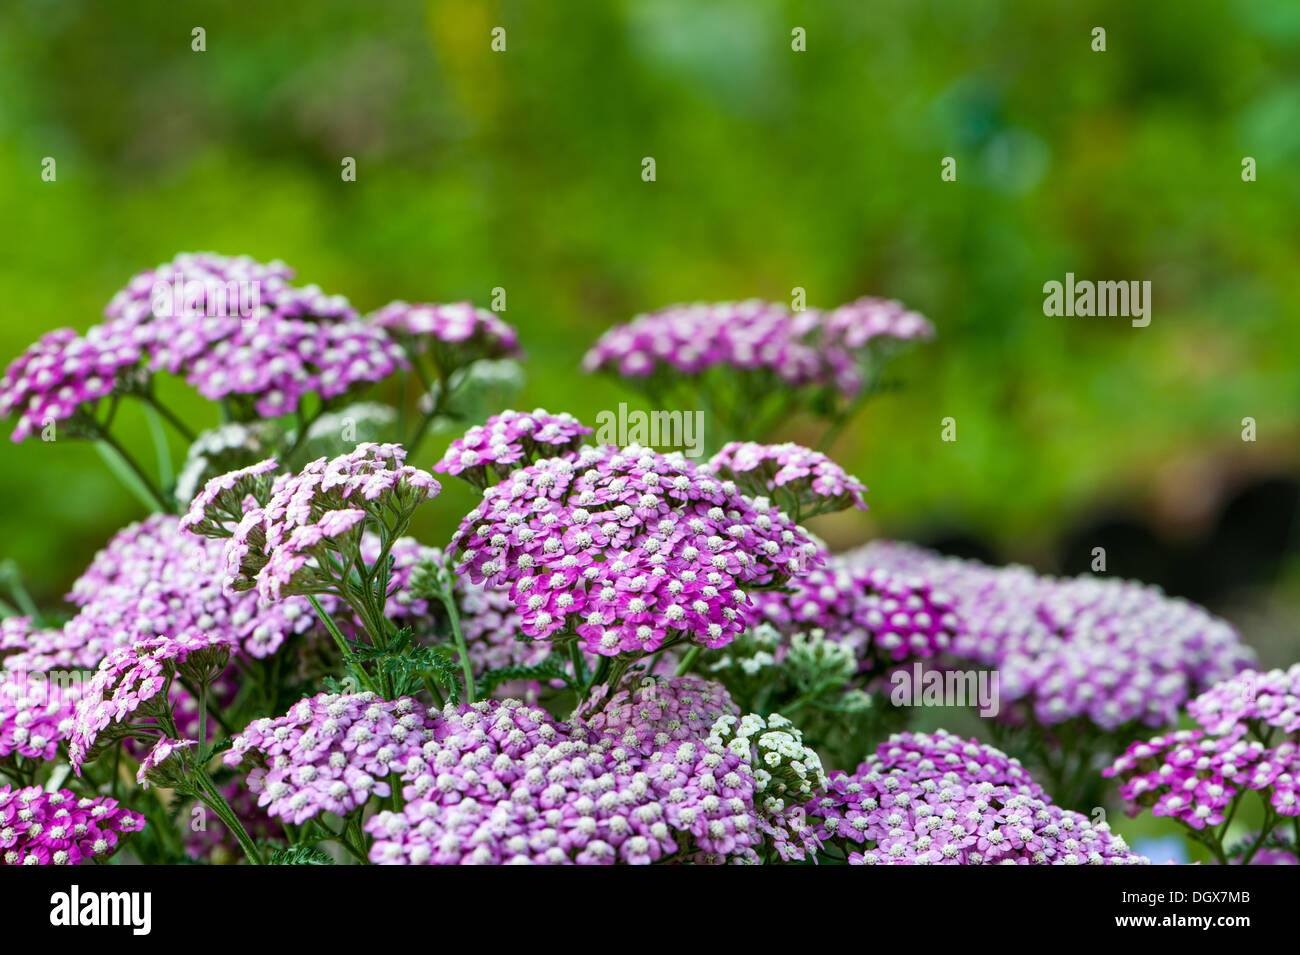 Yarrow flowers with nature background Stock Photo